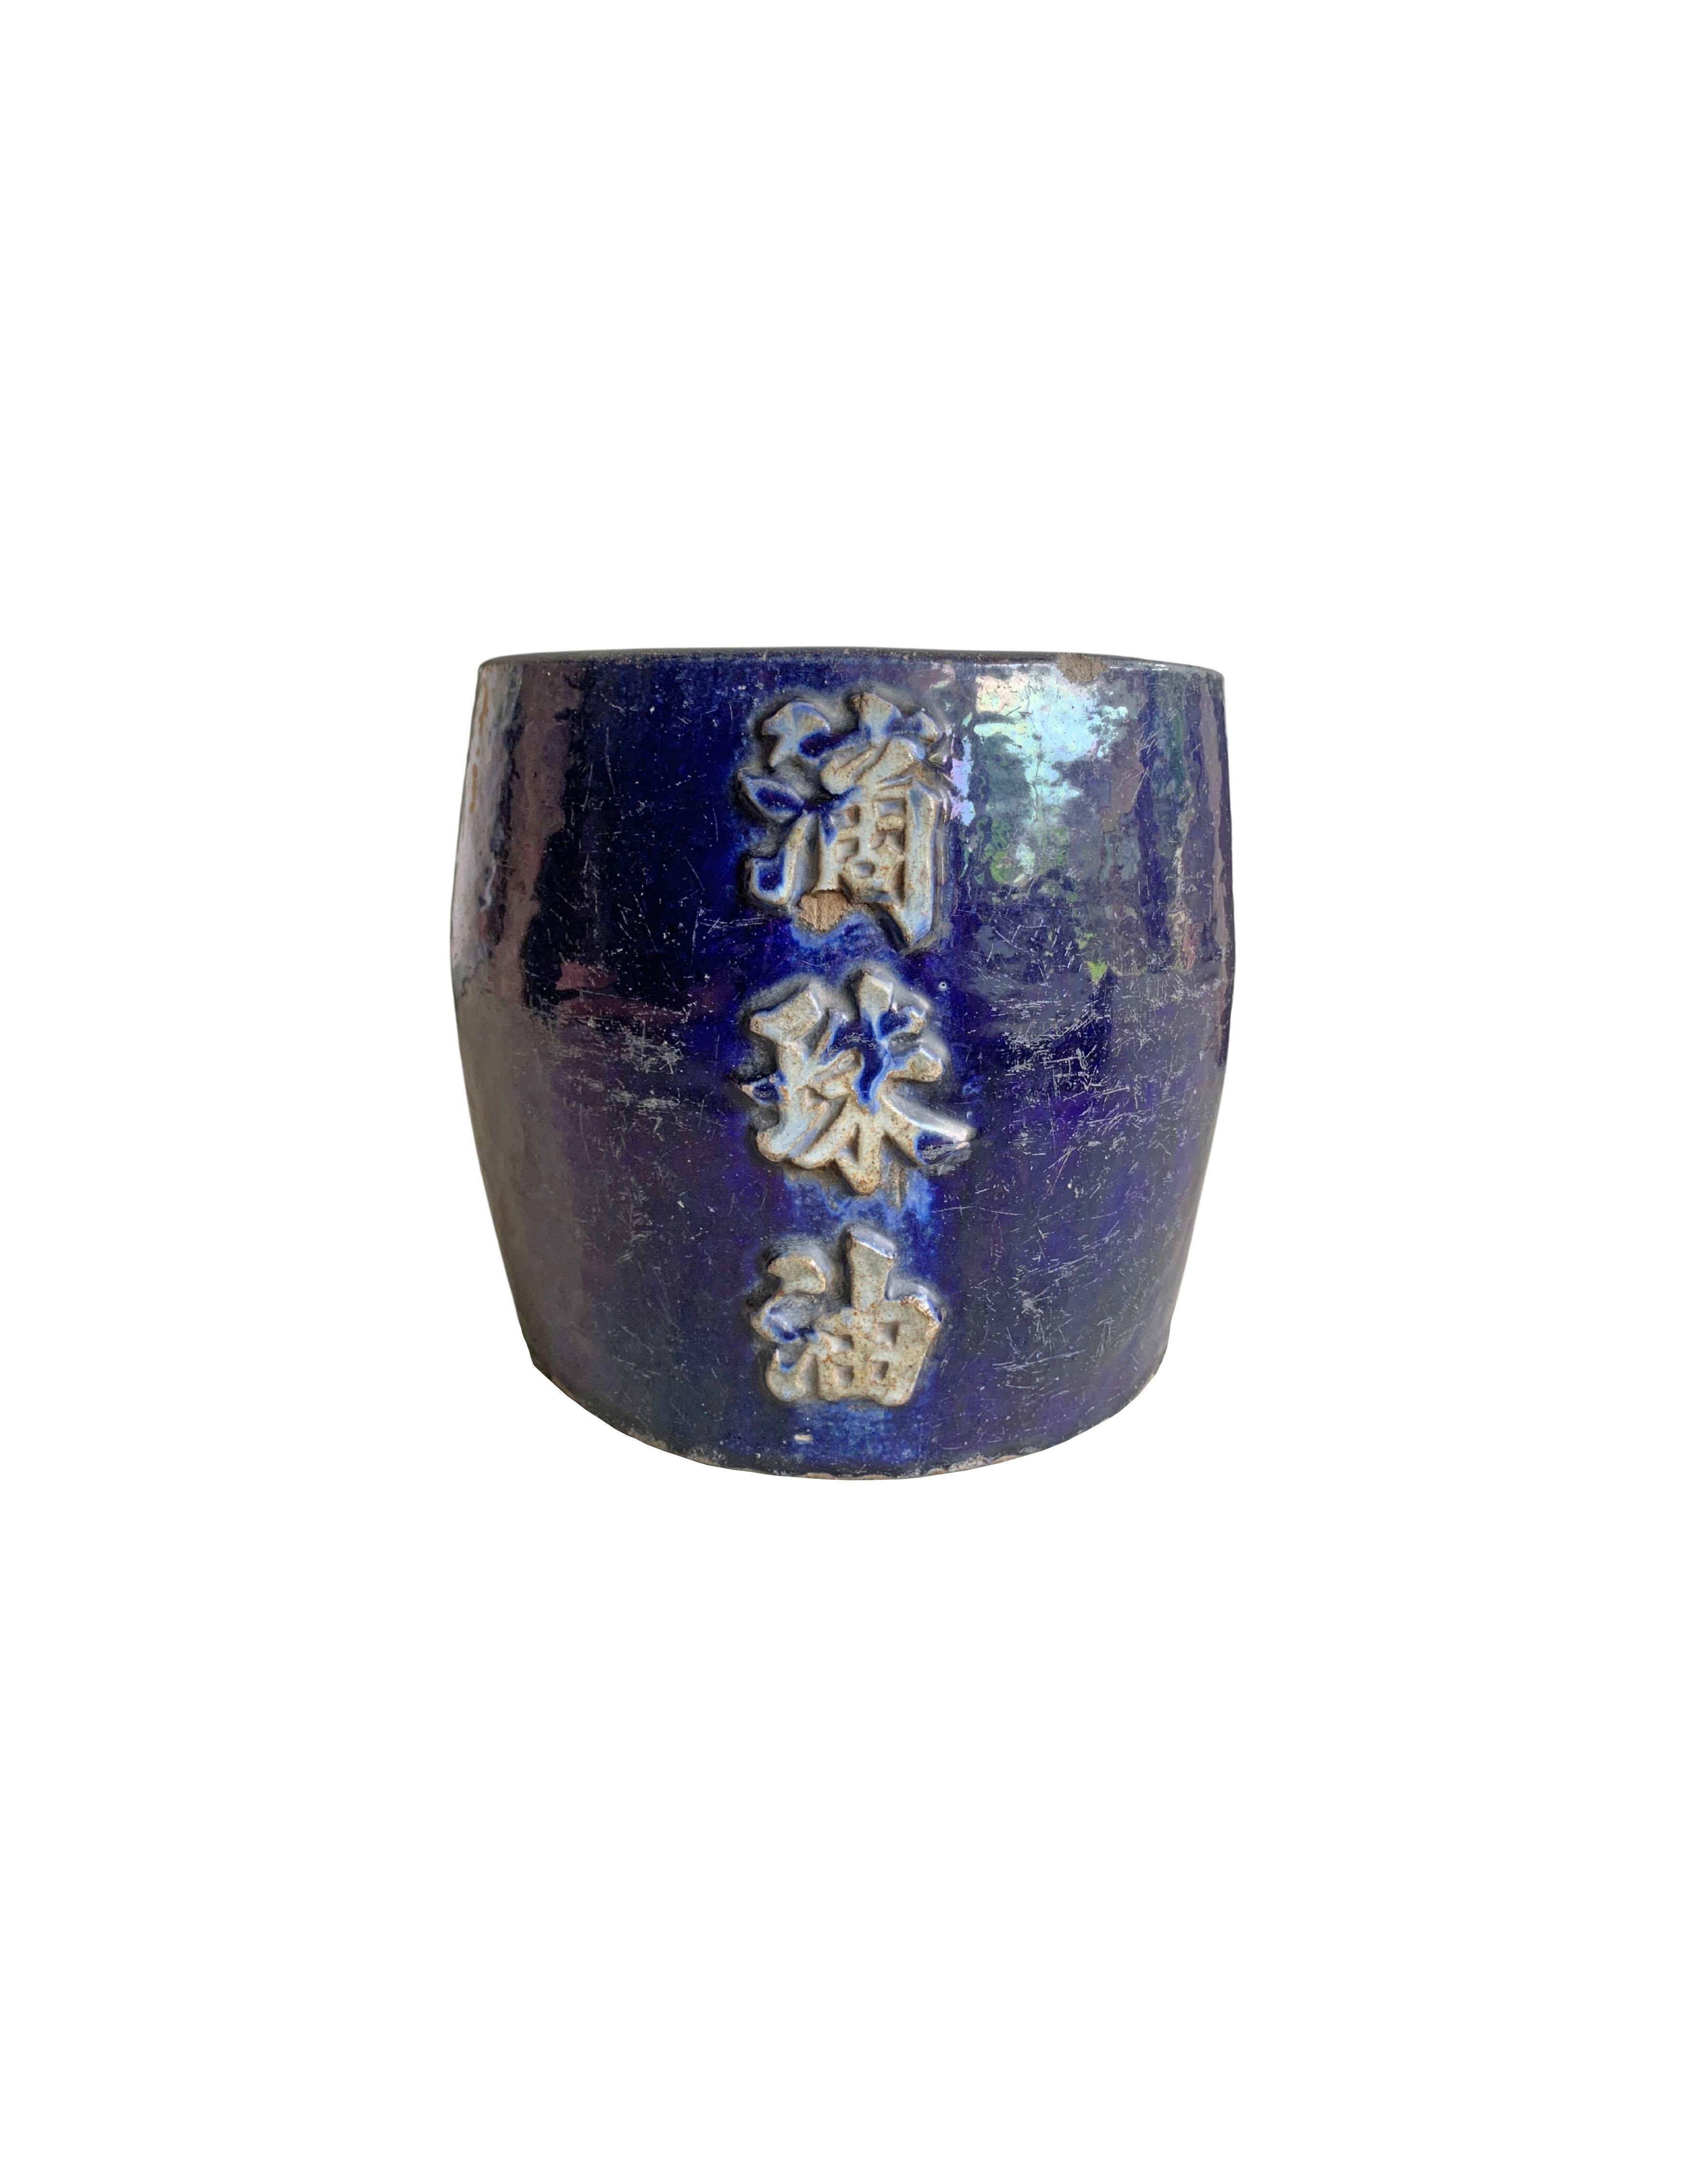 A wonderful deep blue glaze adorns this early 20th Century Chinese soy sauce jar. Jars in the deep blue pigment are relatively rare. The characters on its front side translate to 